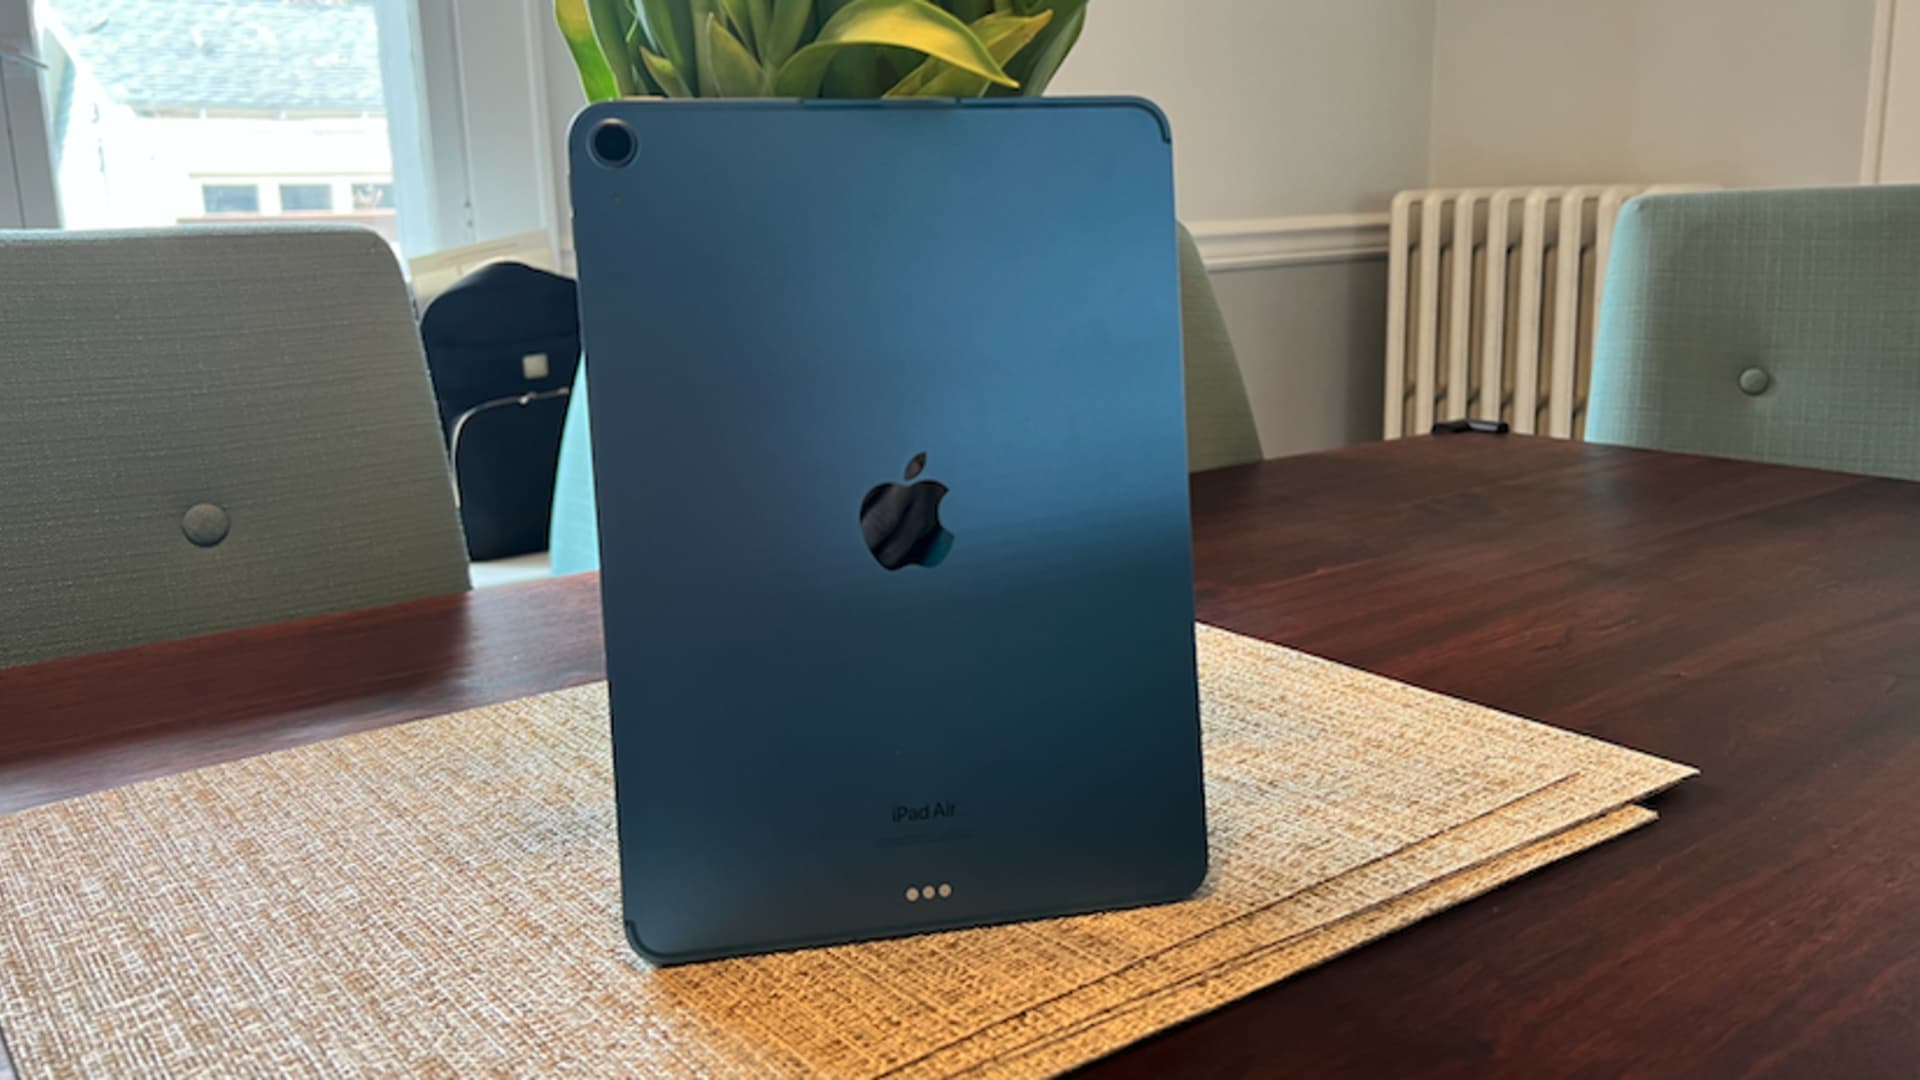 I dig the new blue color of the iPad Air 2022